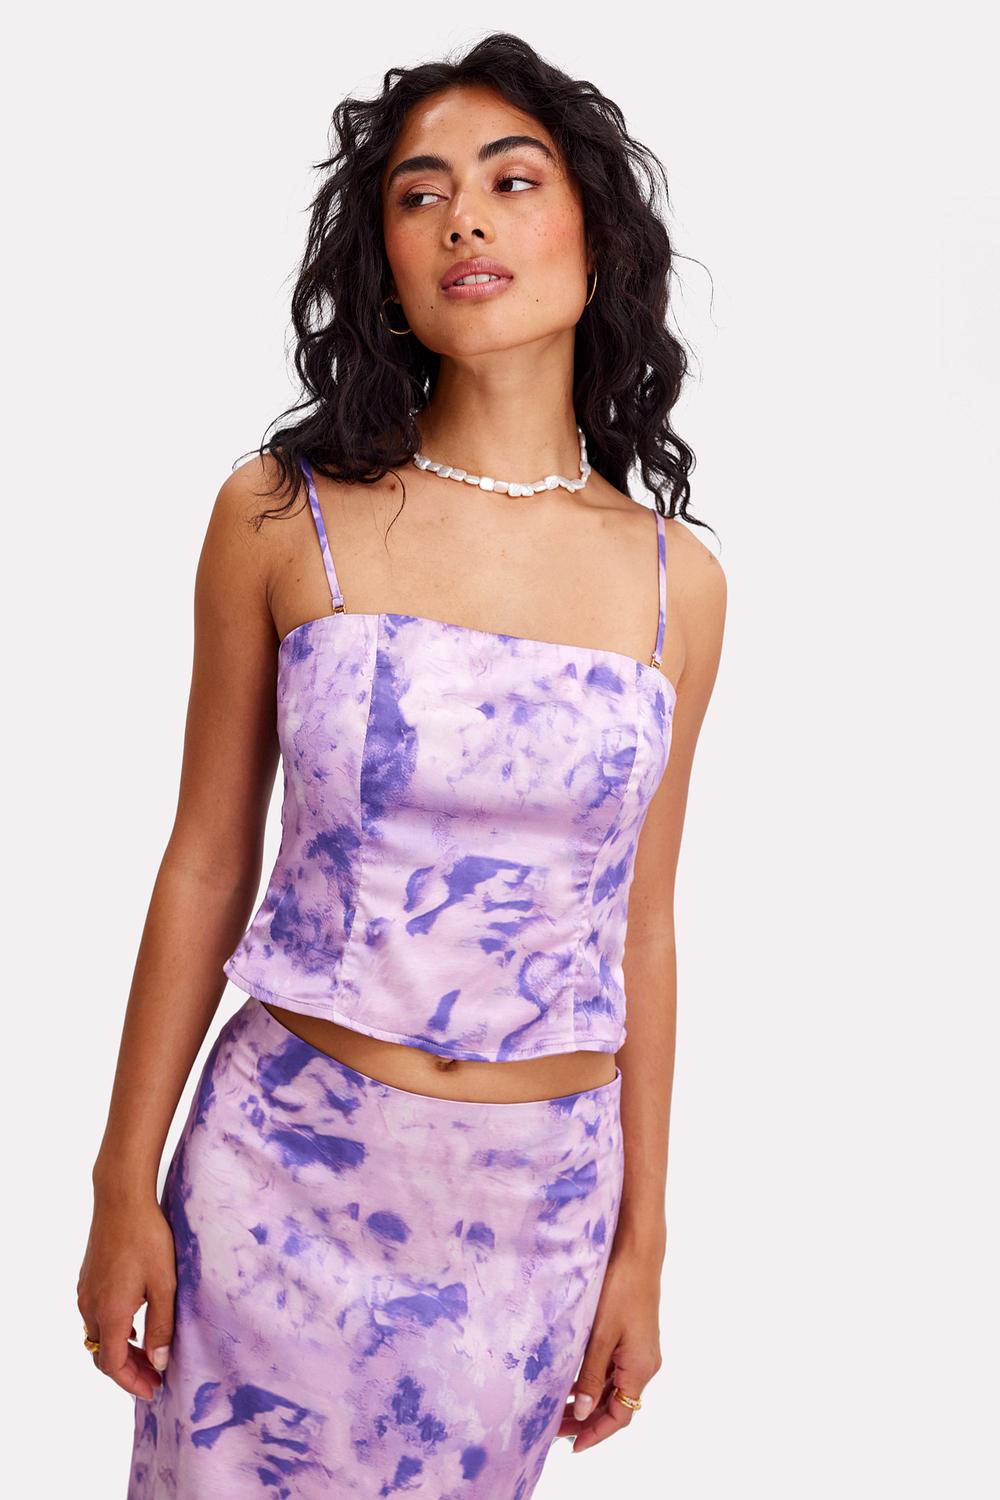 Lilac top